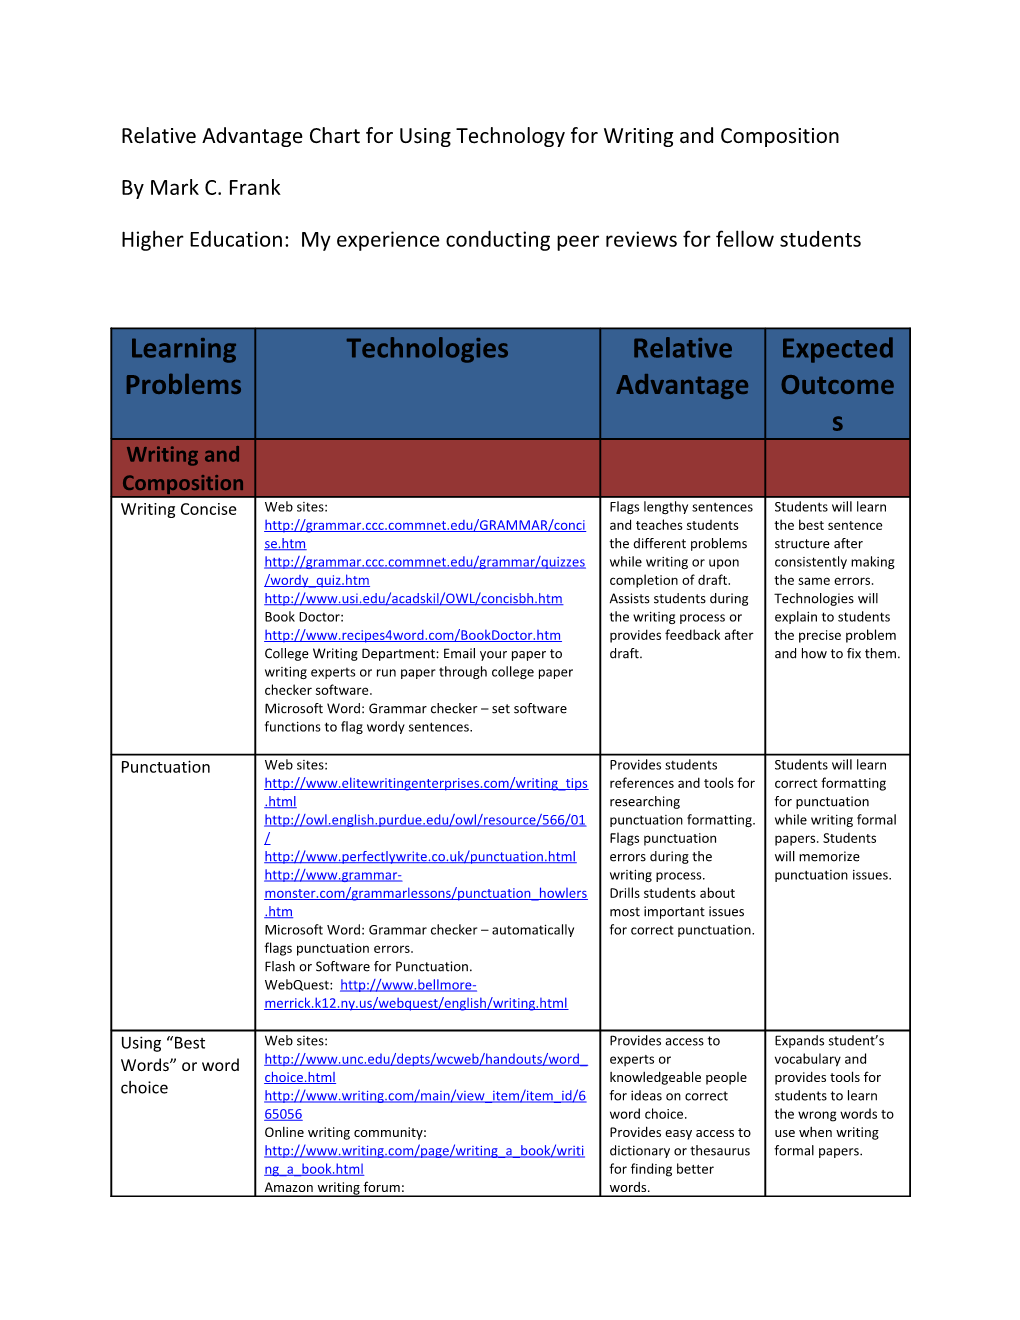 Relative Advantage Chart for Using Technology for Writing and Composition